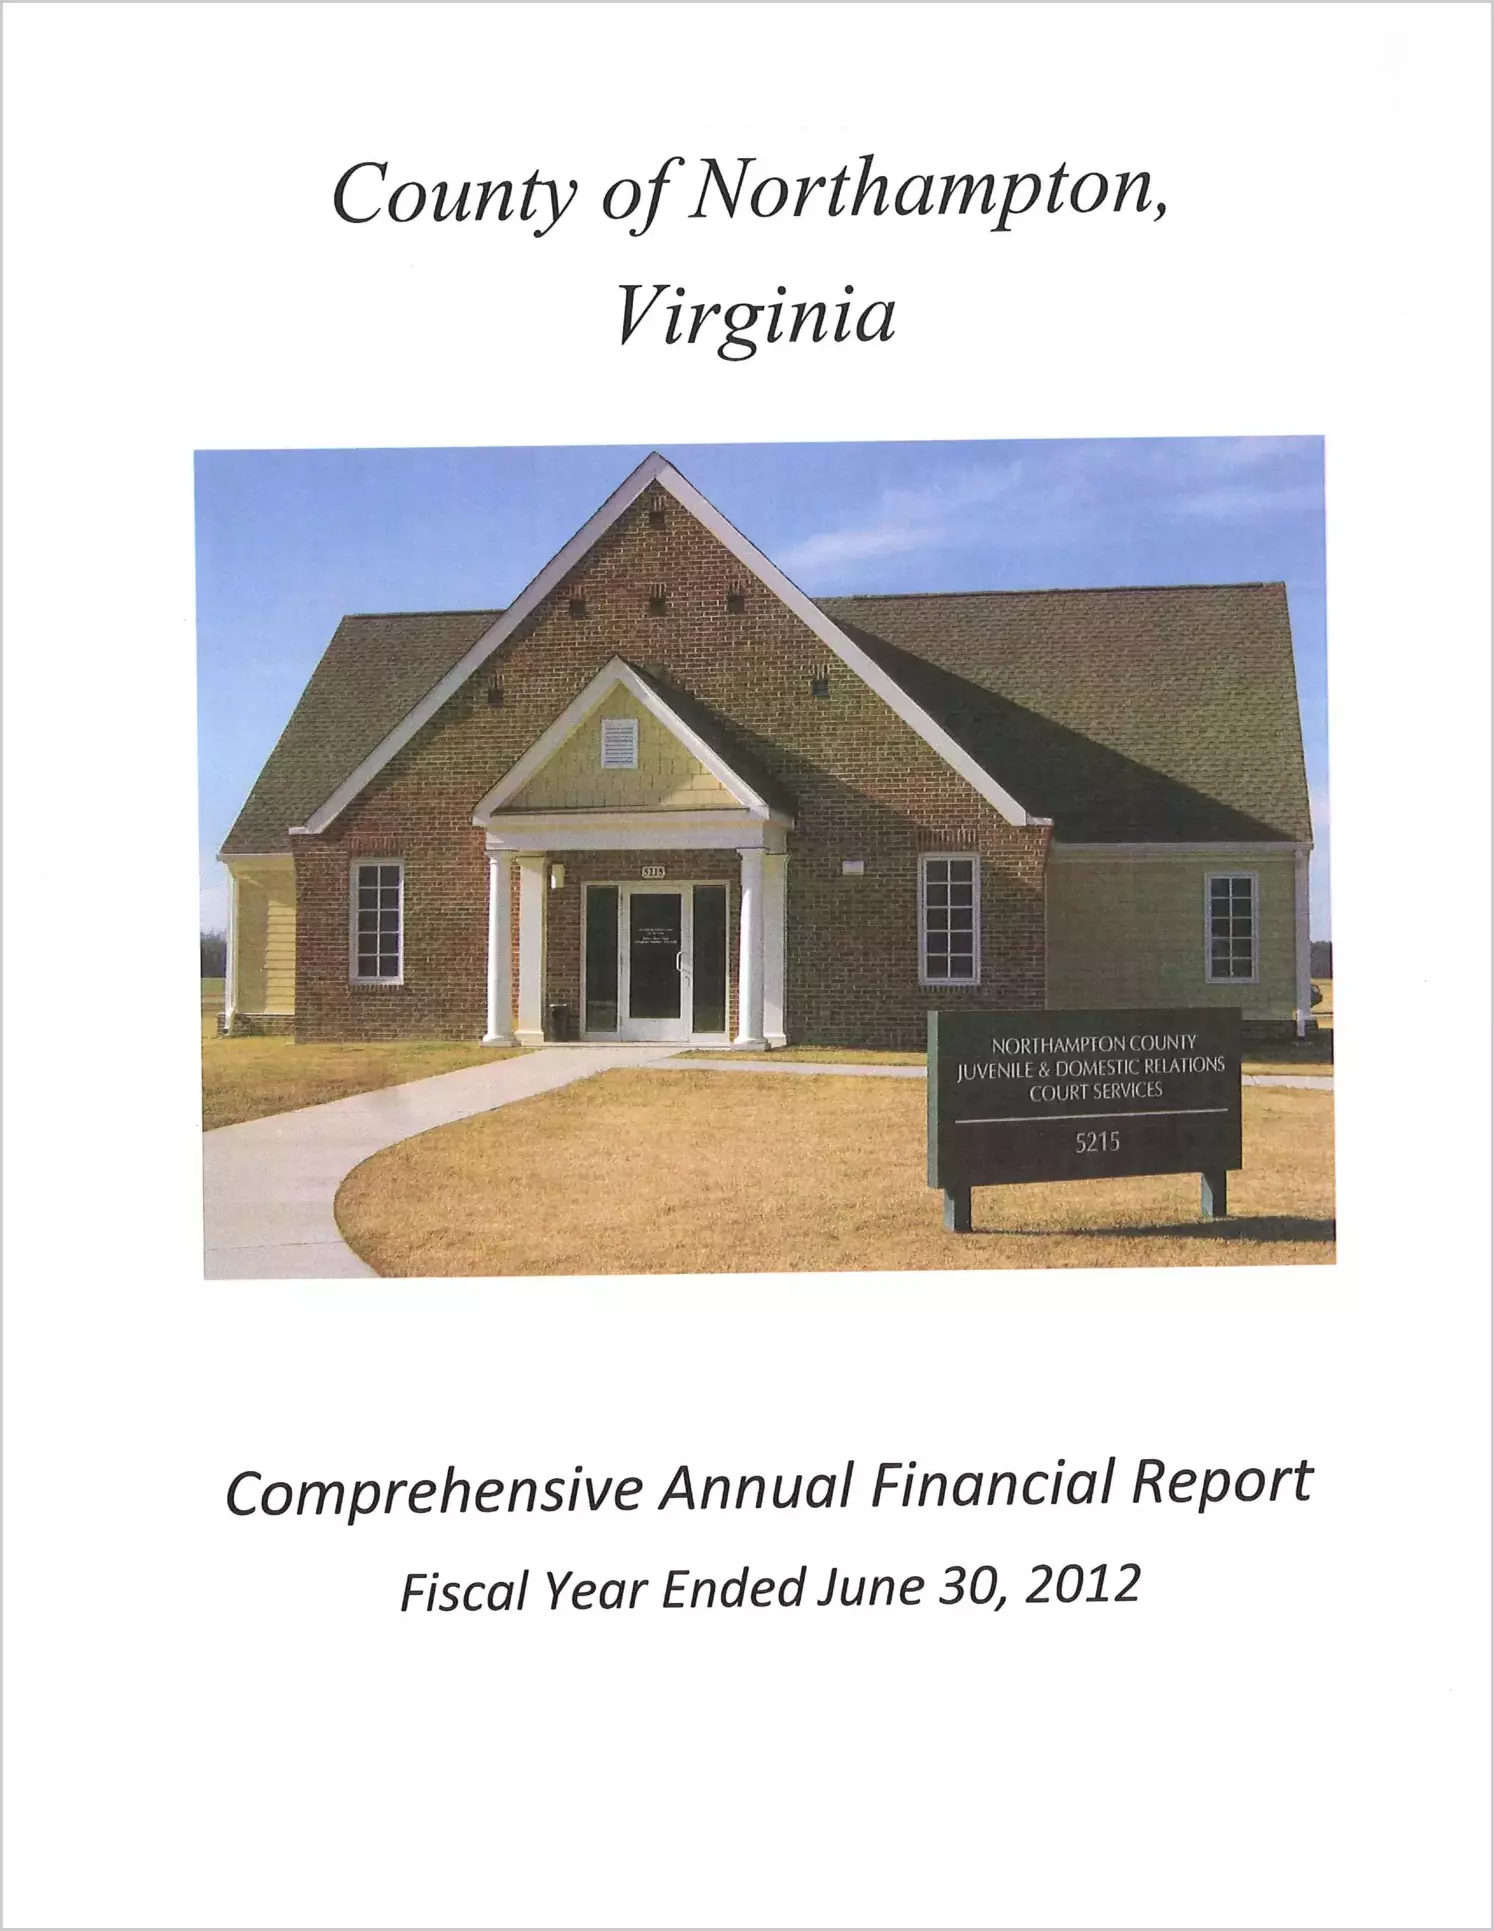 2012 Annual Financial Report for County of Northampton